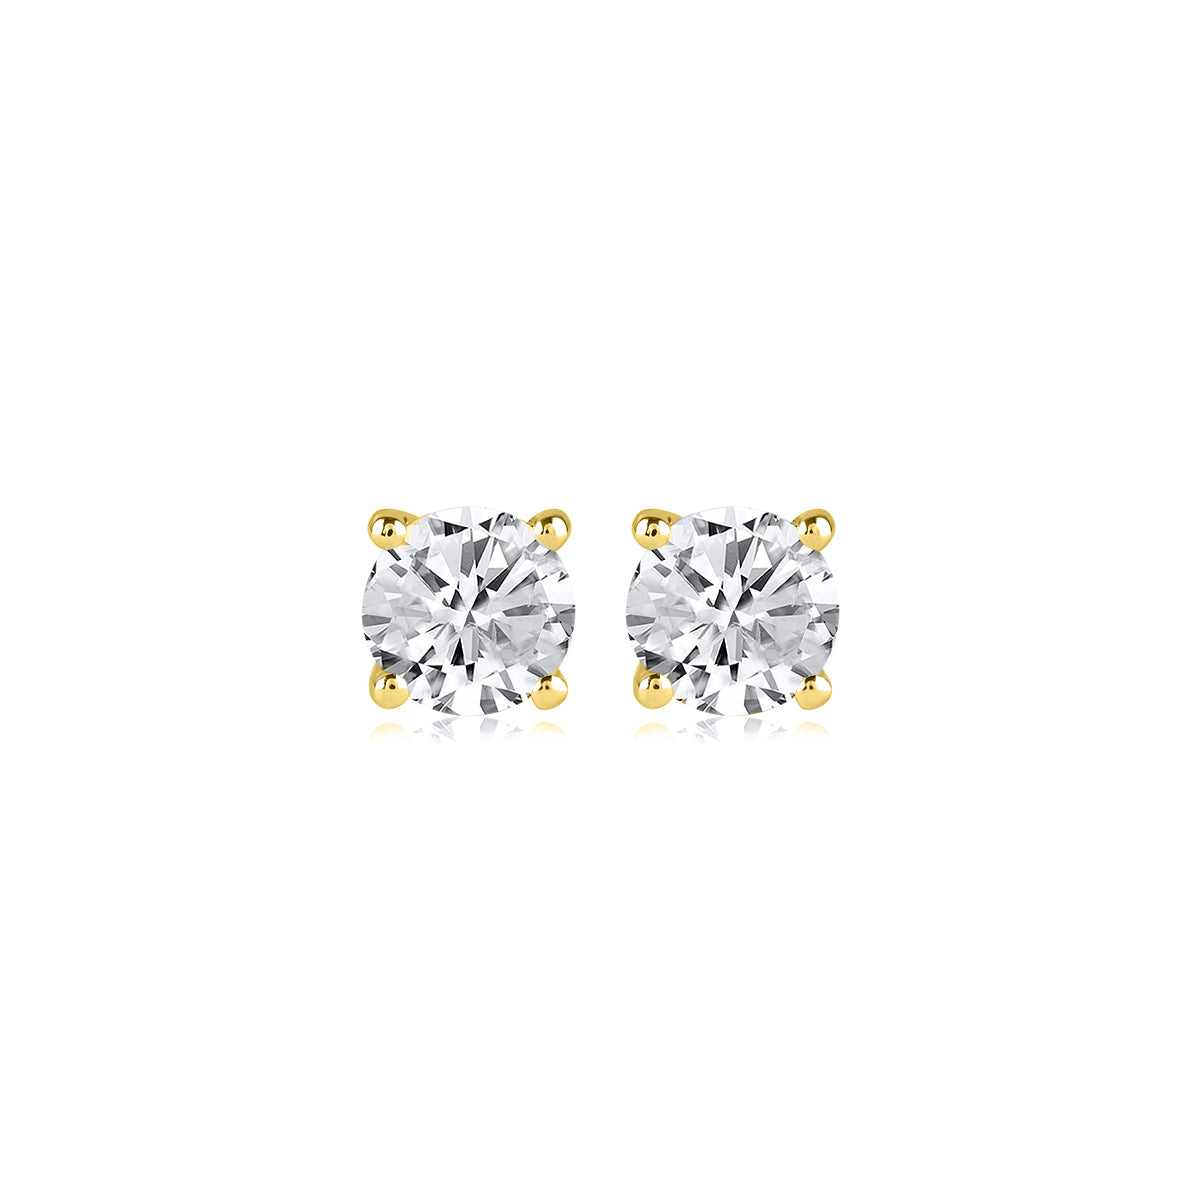 0.66 Carat Solitaire Stud Earrings with Friction Back in 14K Gold